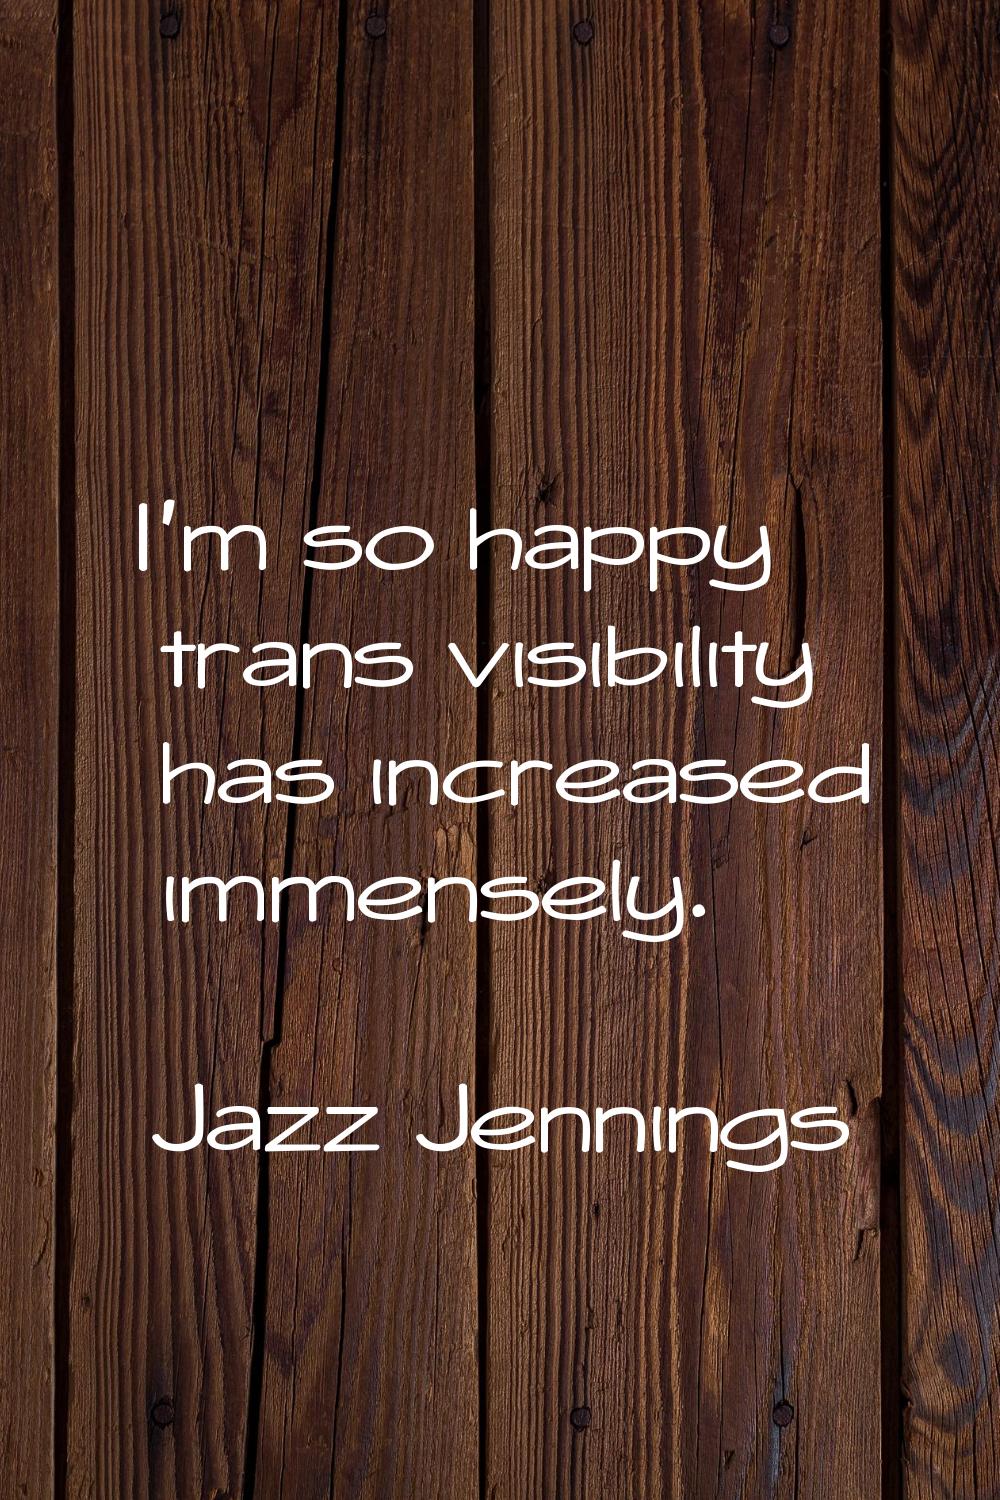 I'm so happy trans visibility has increased immensely.